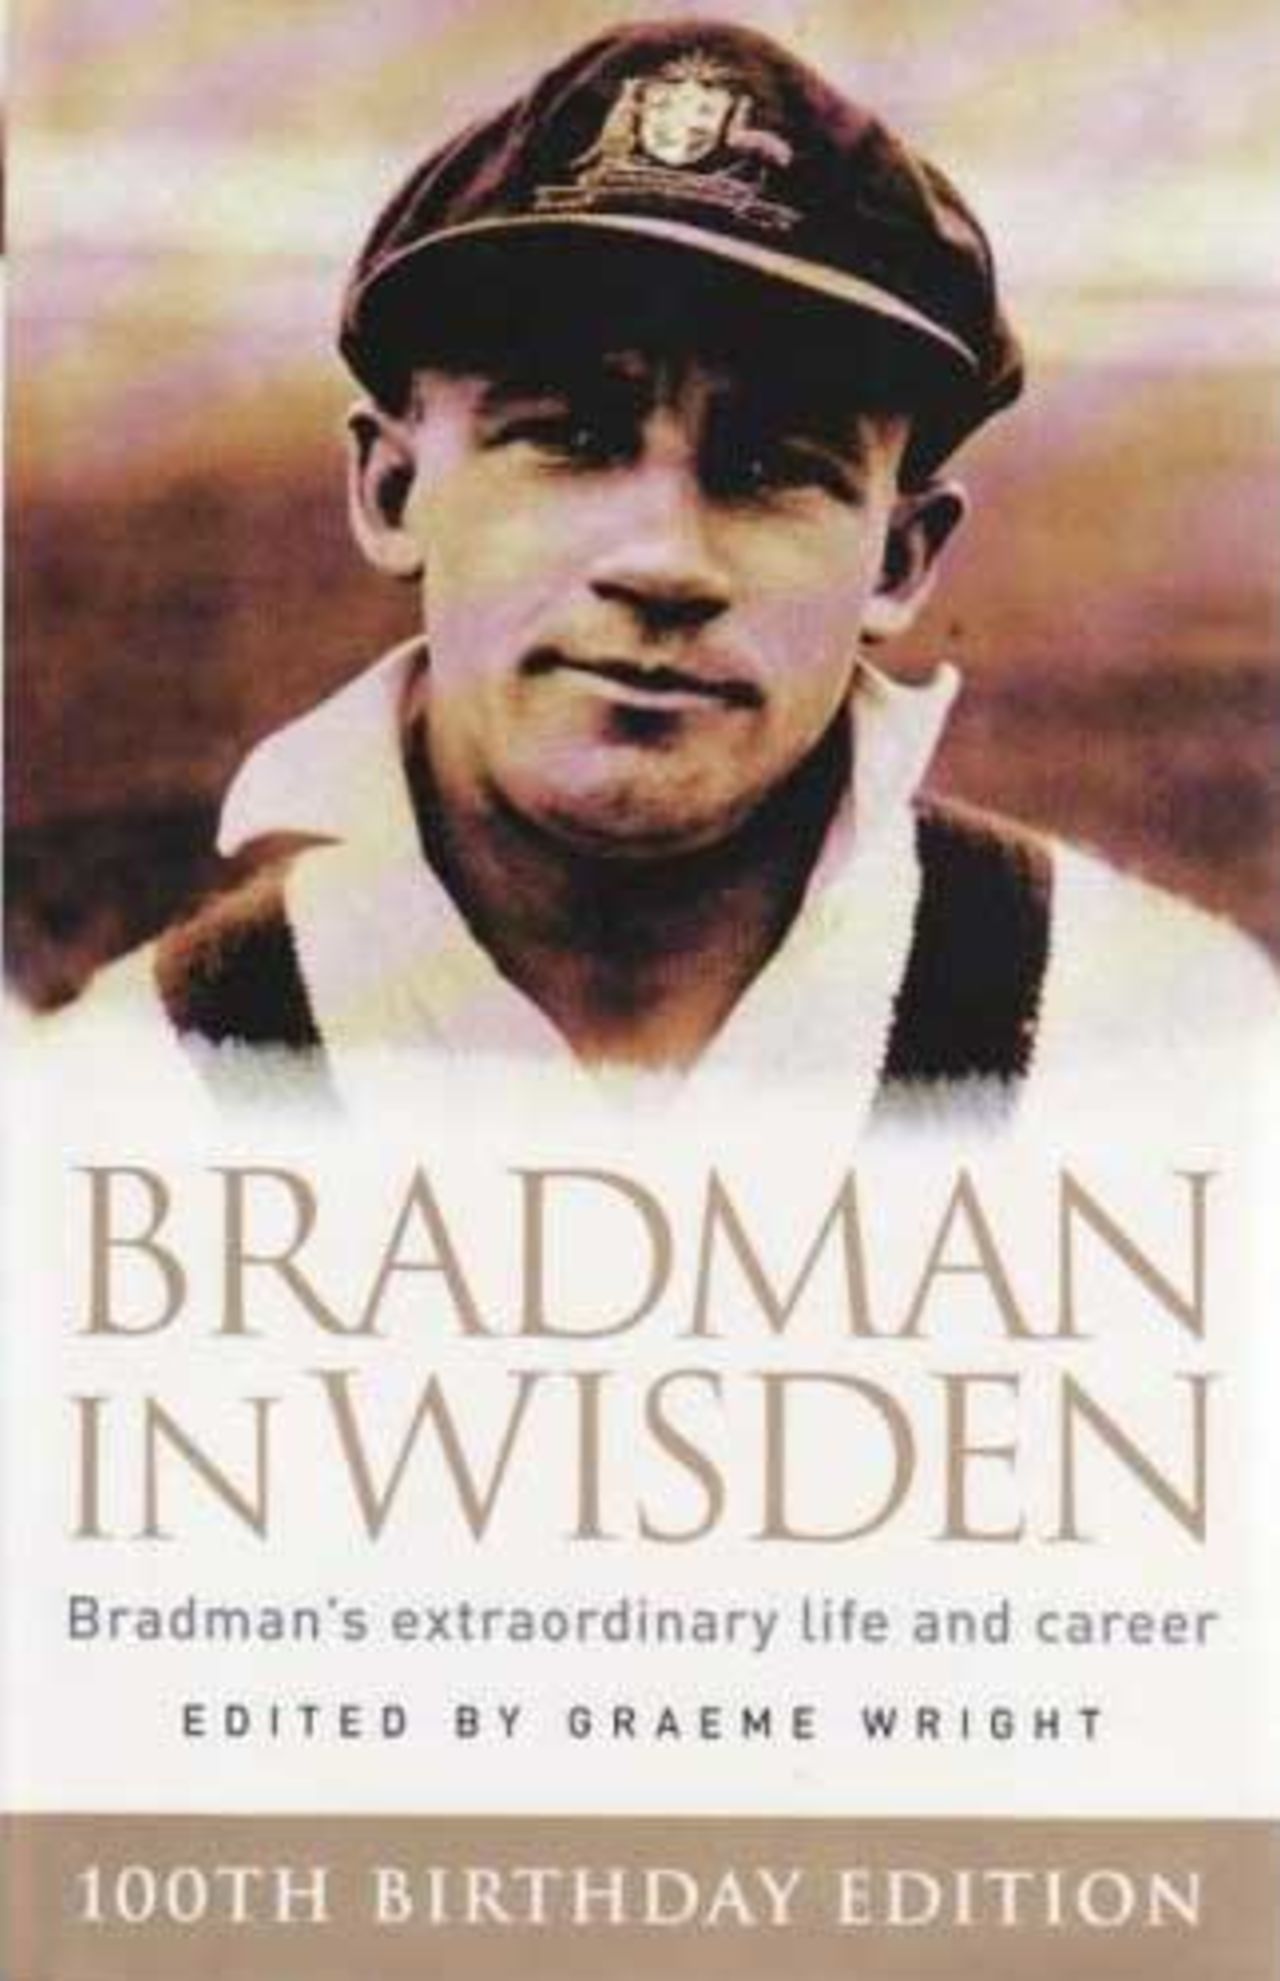 Cover image of <i>Bradman in Wisden</i>, edited by Graeme Wright